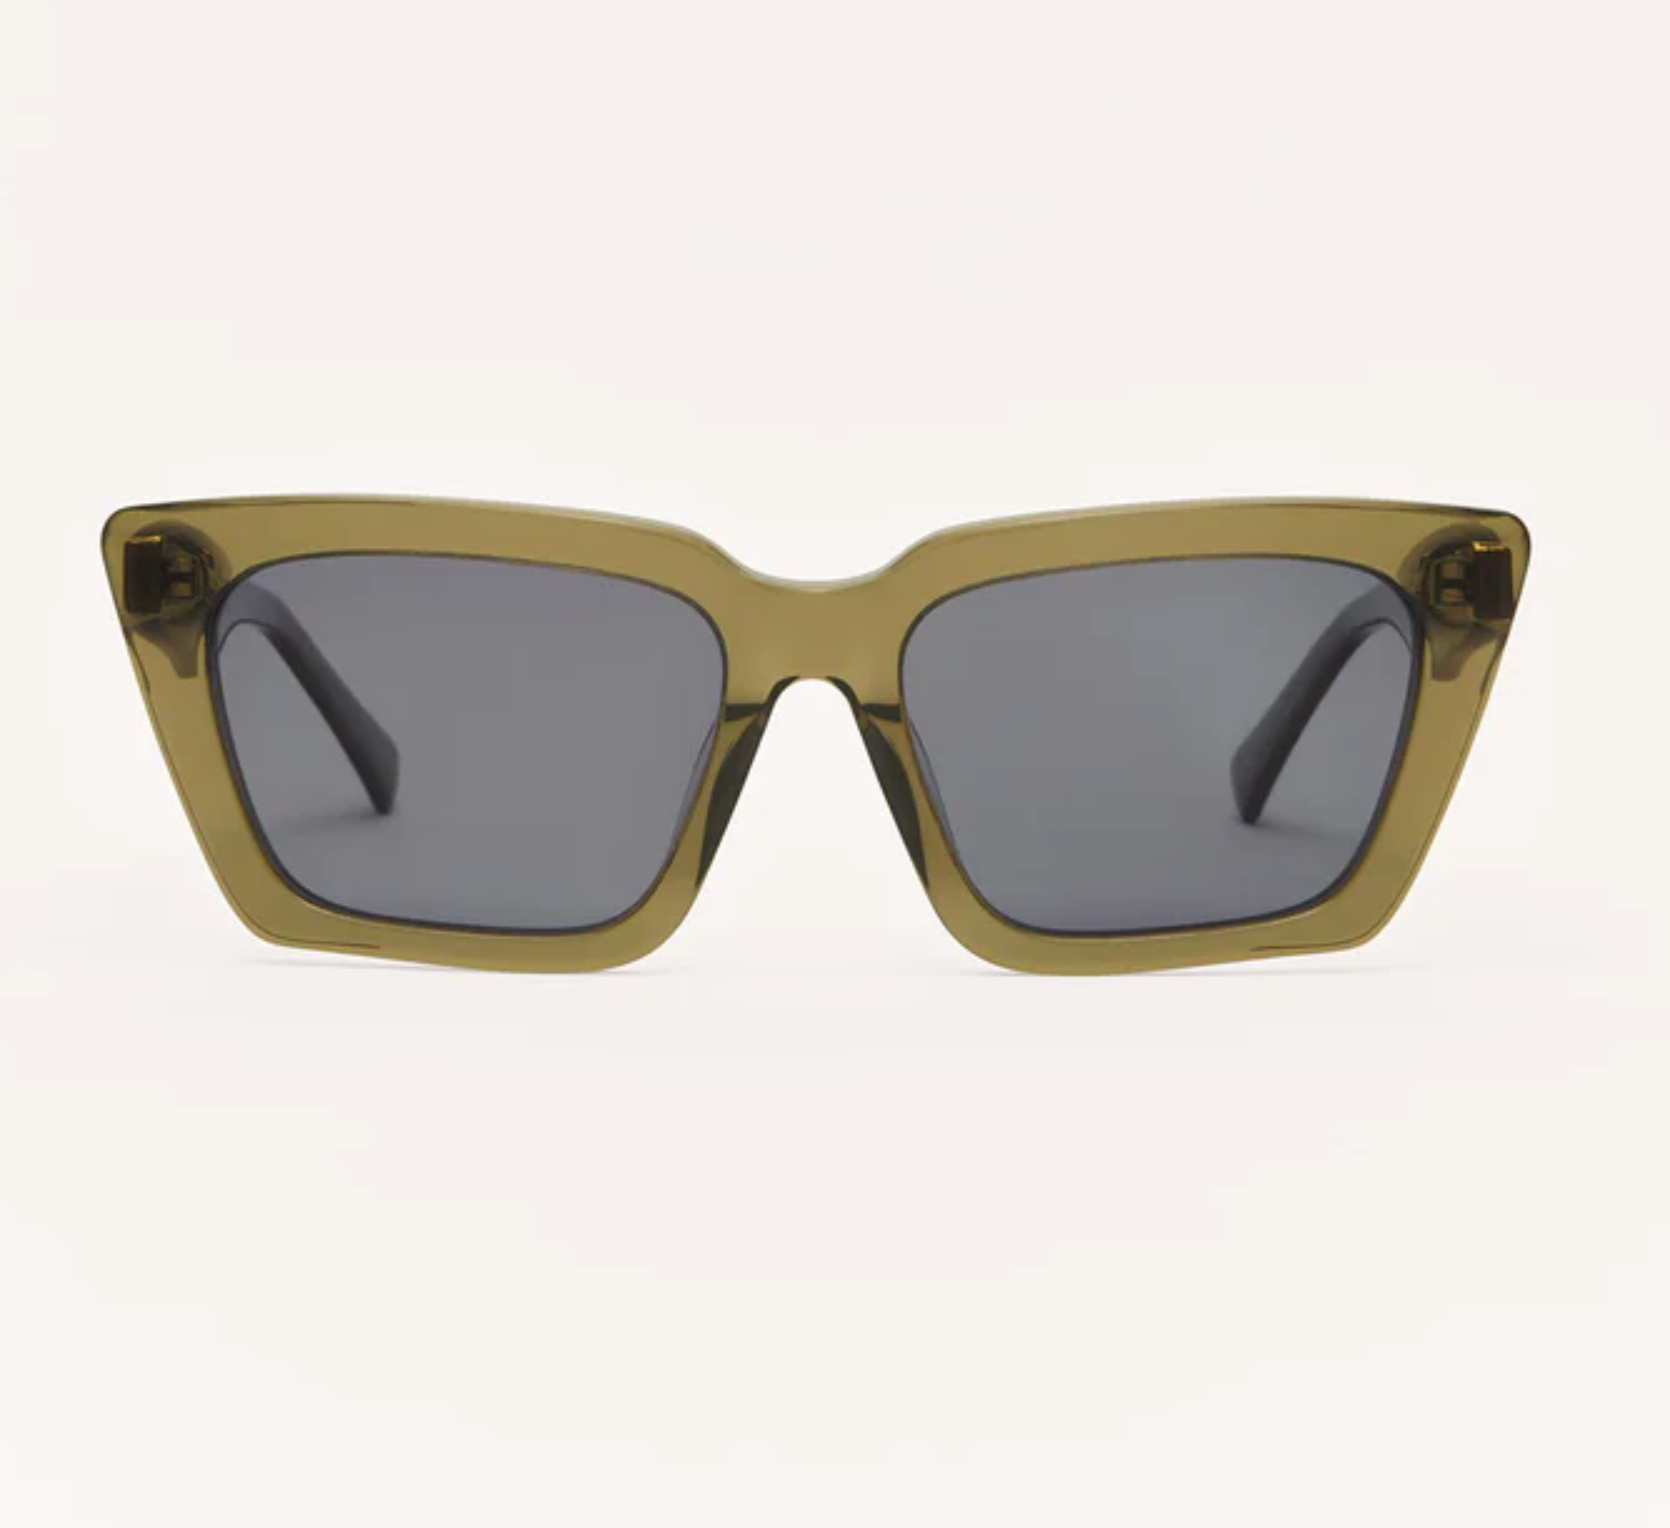 Feel Good Sunglasses by Z Supply, Moss